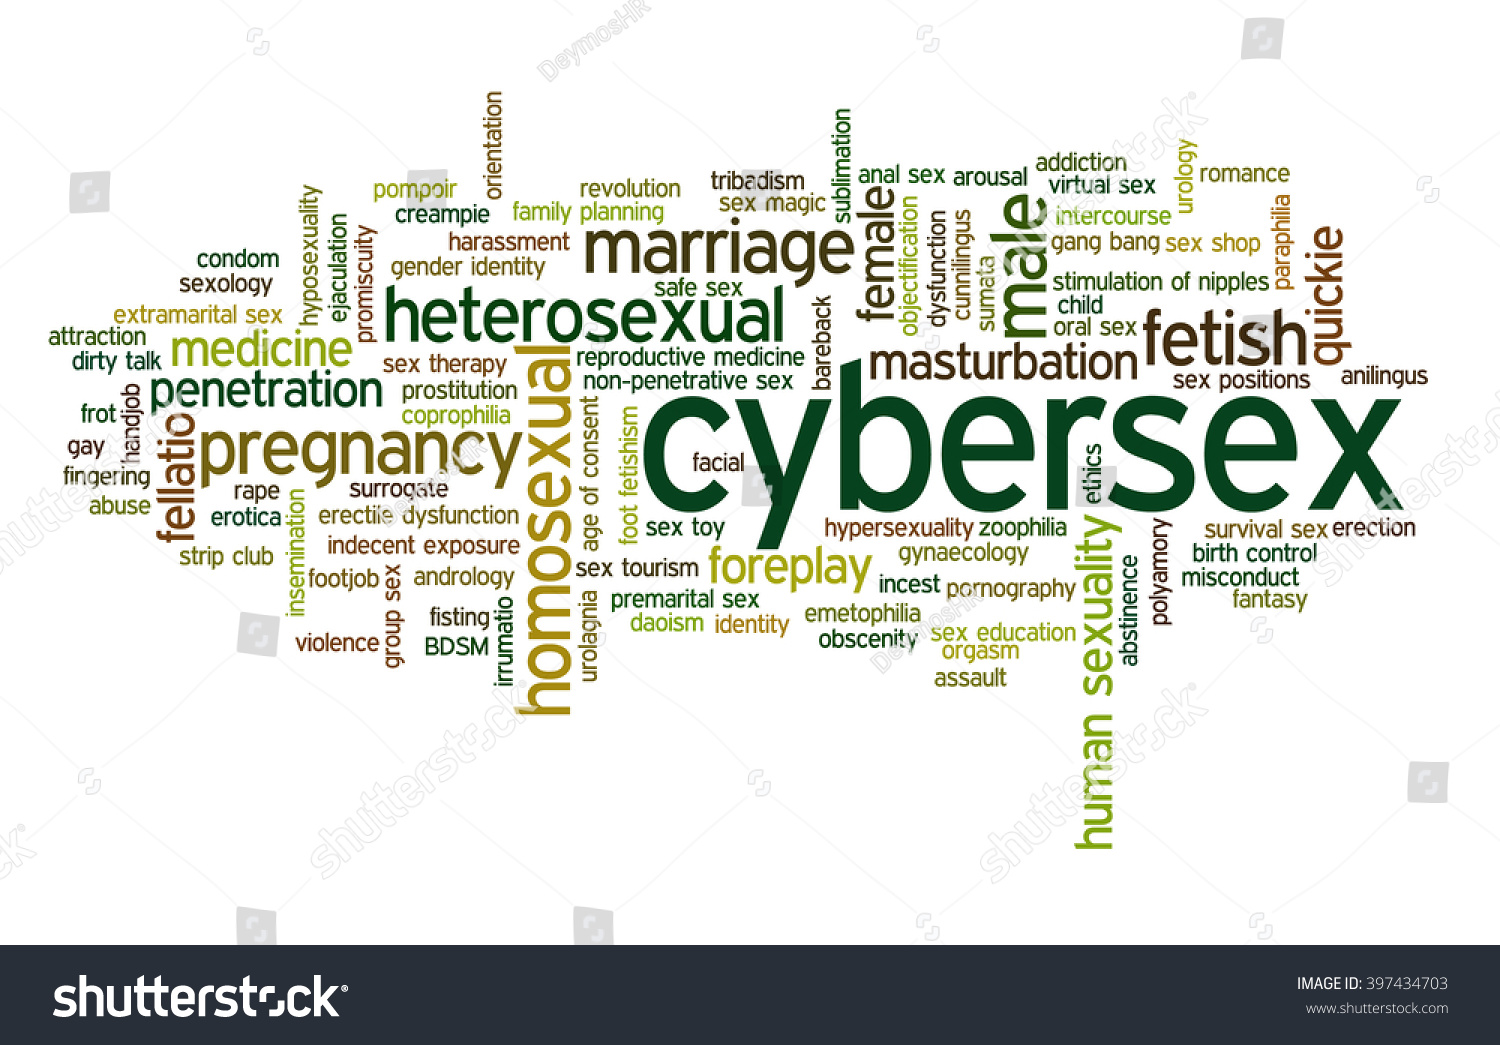 Word Cloud Illustrating Words Related Human Stock Vector Royalty Free 397434703 Shutterstock 2428